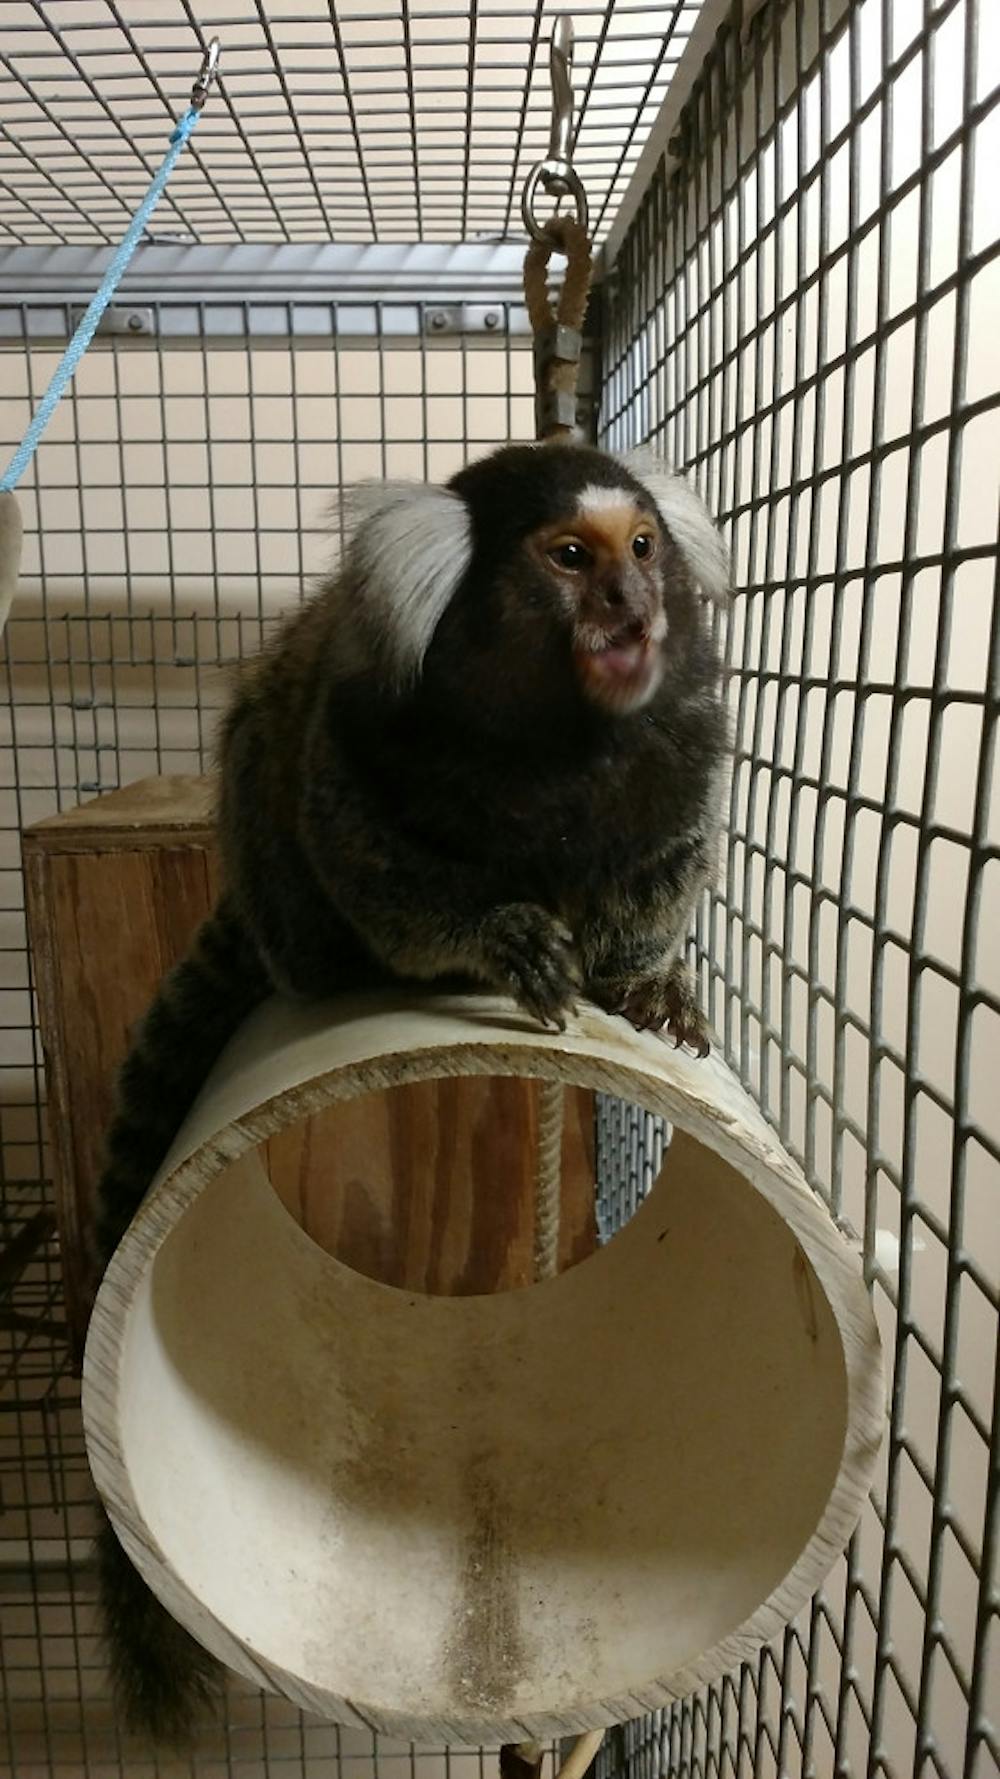 <p><span>Leiah, 4, arrived at her new home at the Jungle Friends Primate Sanctuary in Gainesville on </span><span><span><span><span>Saturday</span></span></span></span><span>. Common marmosets in captivity usually live to be about 11 or 12 years old.</span></p>